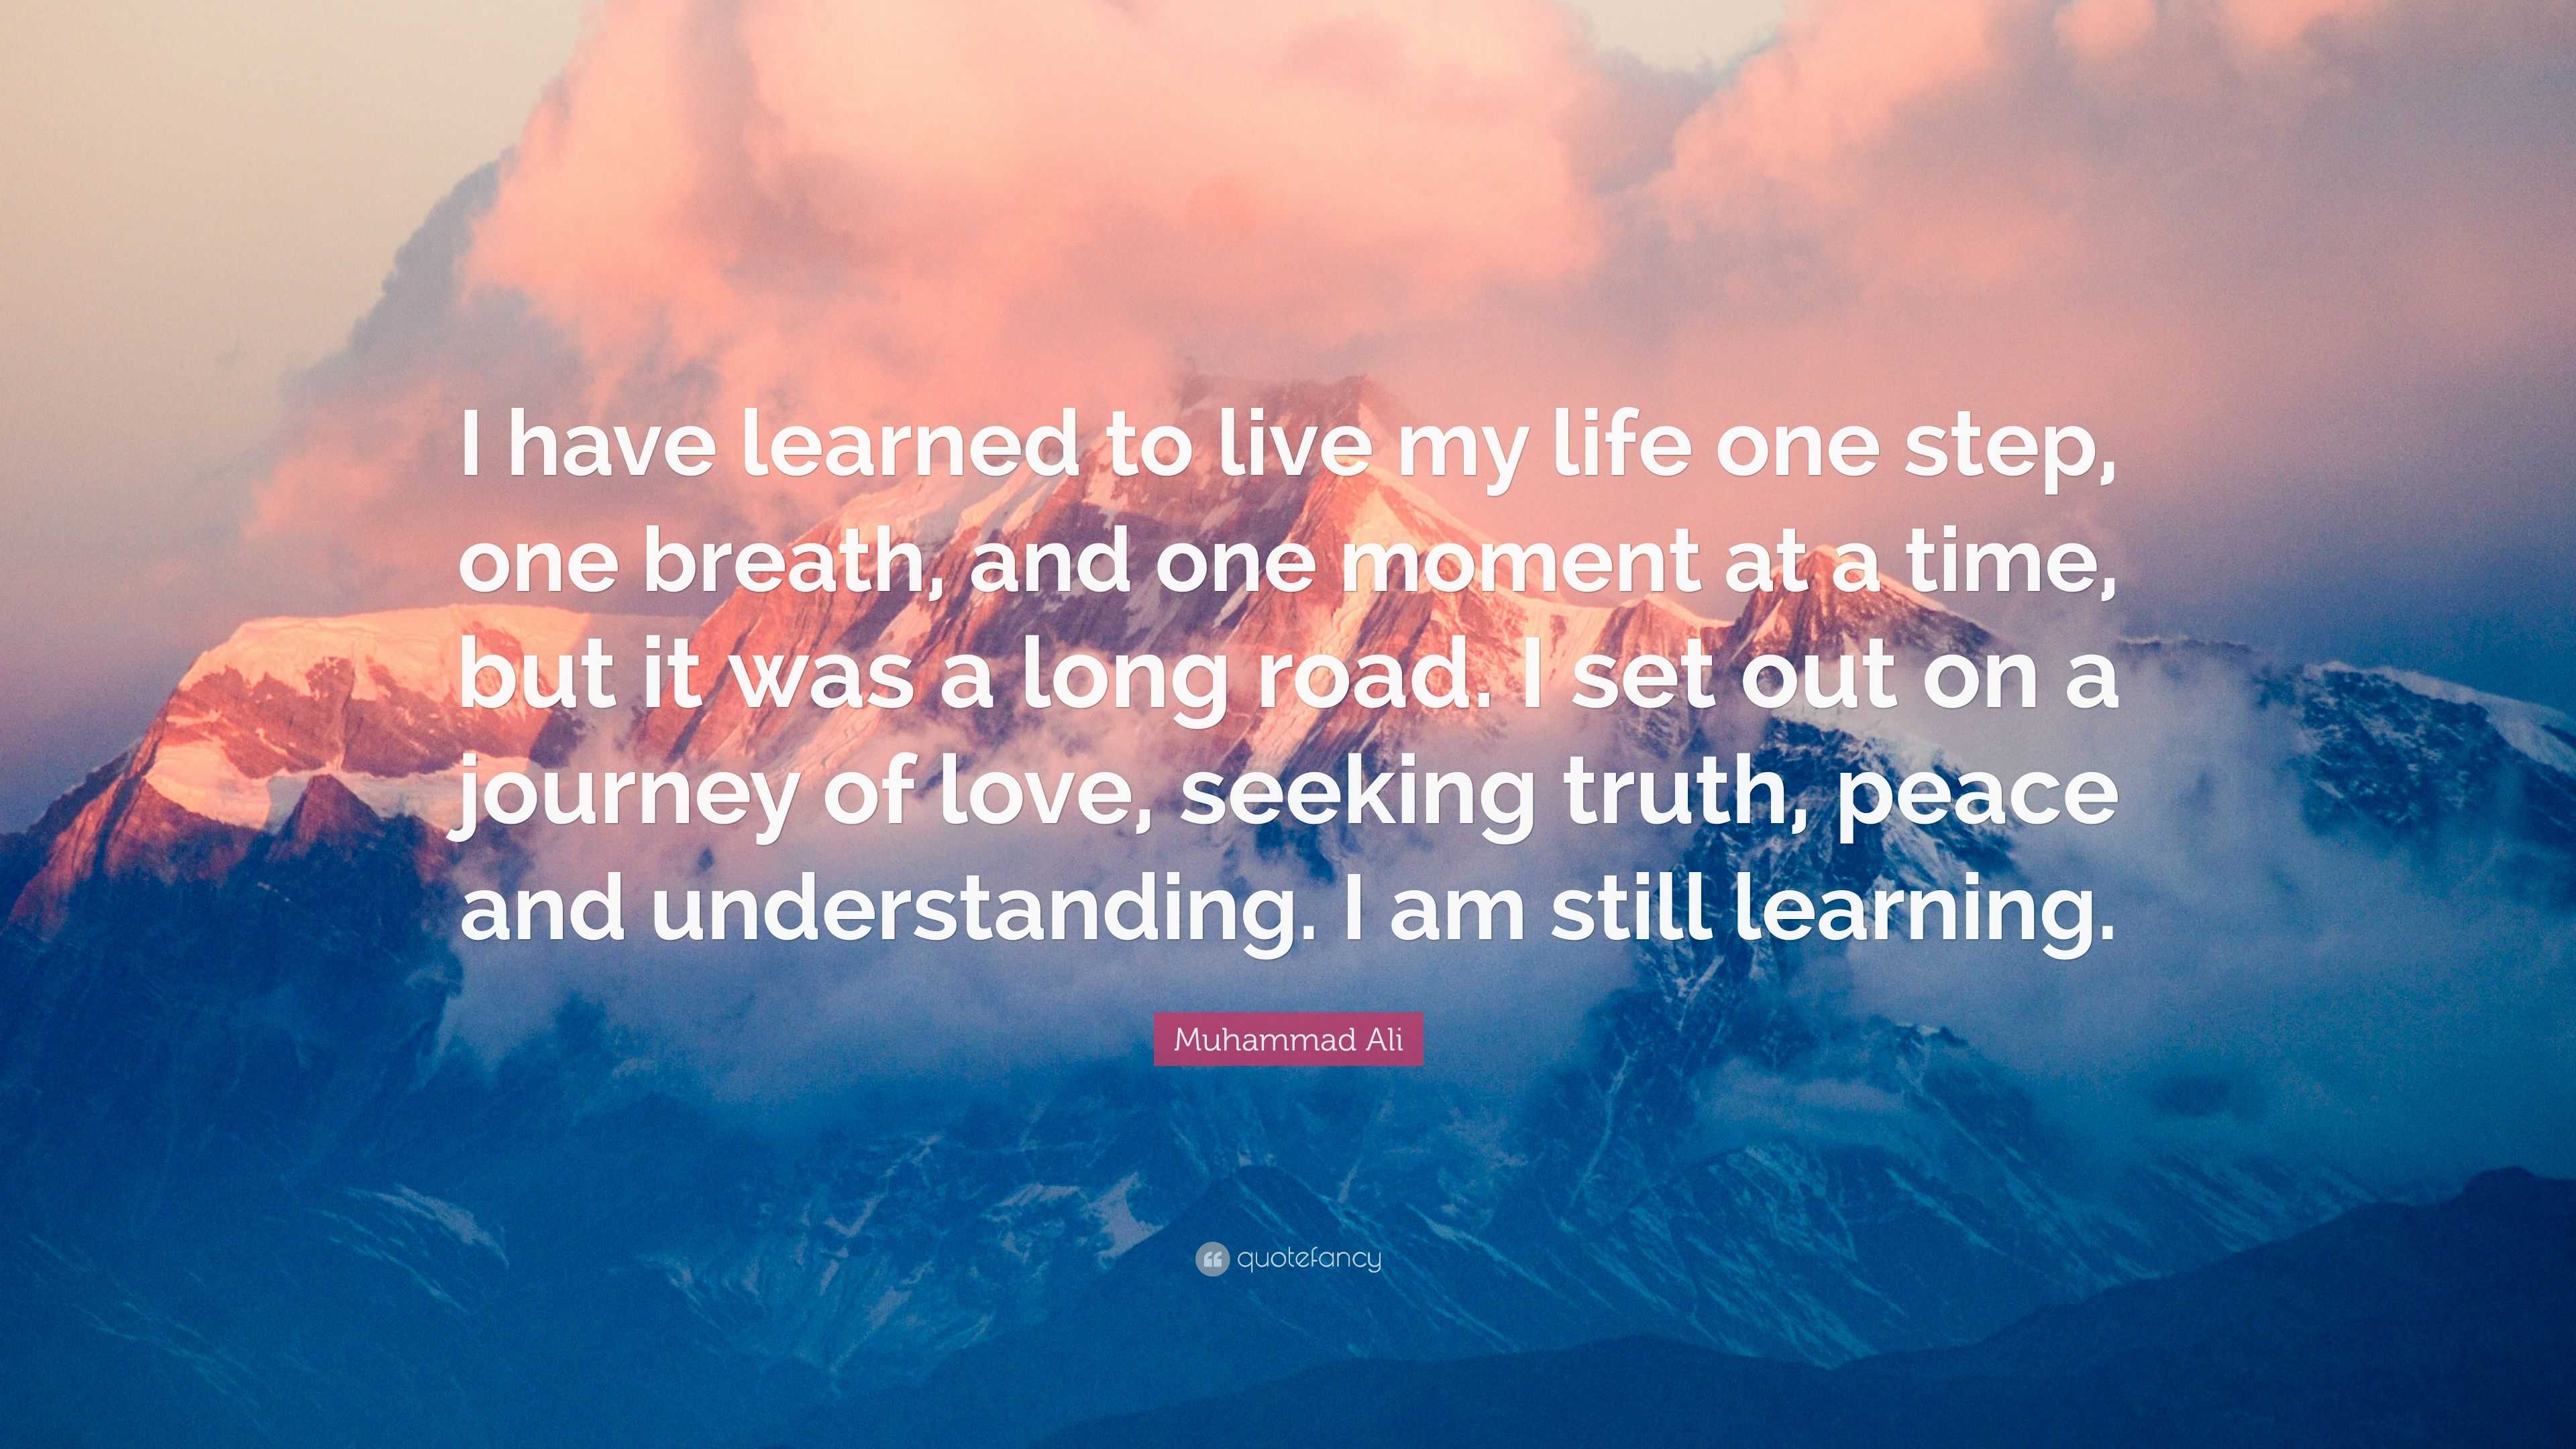 Muhammad Ali Quote: “I have learned to live my life one step, one ...